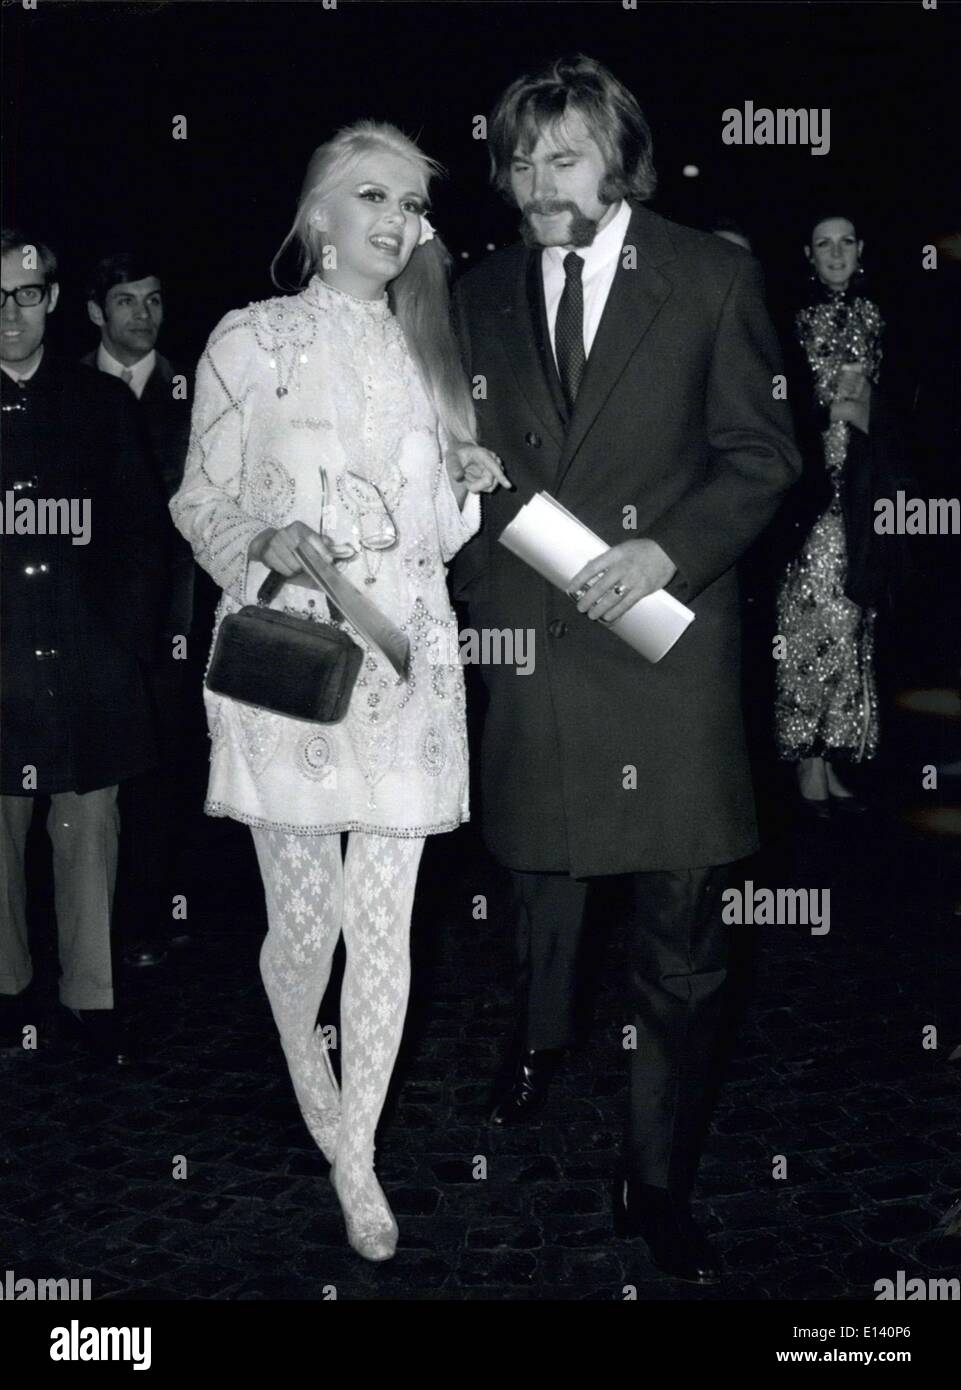 Mar. 31, 2012 - Gala perfromance at the Cinema Royal for the film ''2001, Space Odyssey''. Many stars attended at the gala. Photo shows American actress Pamela Tibfin and Franco Nero. Acotr Franco Nero was the friend of the British actress Vanessa Redgrave. Is the Anglo-Italian love finished? Stock Photo